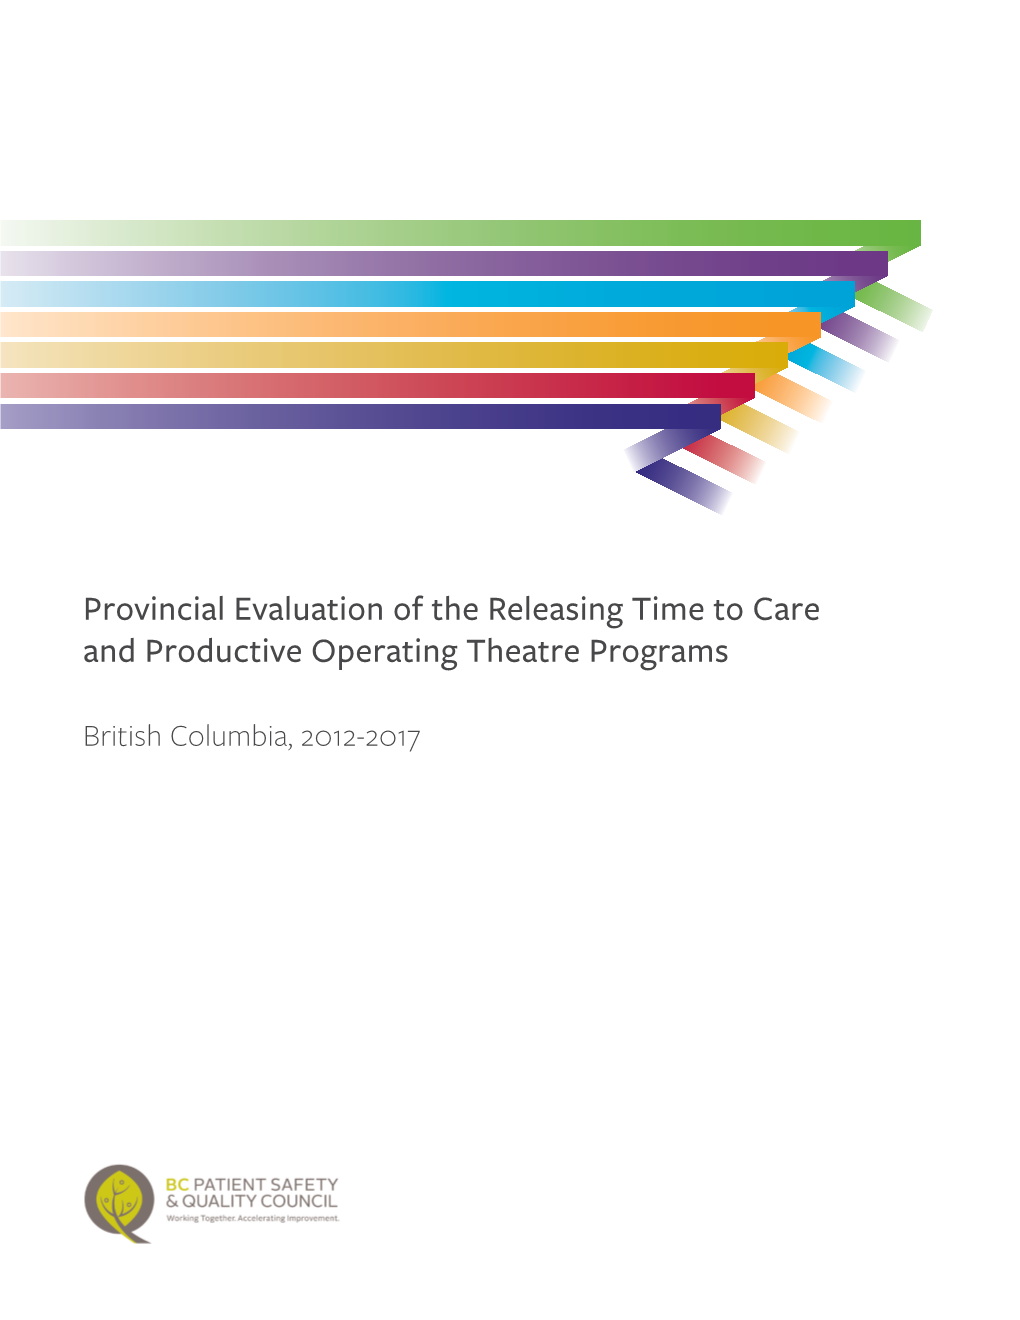 Provincial Evaluation of the Releasing Time to Care and Productive Operating Theatre Programs